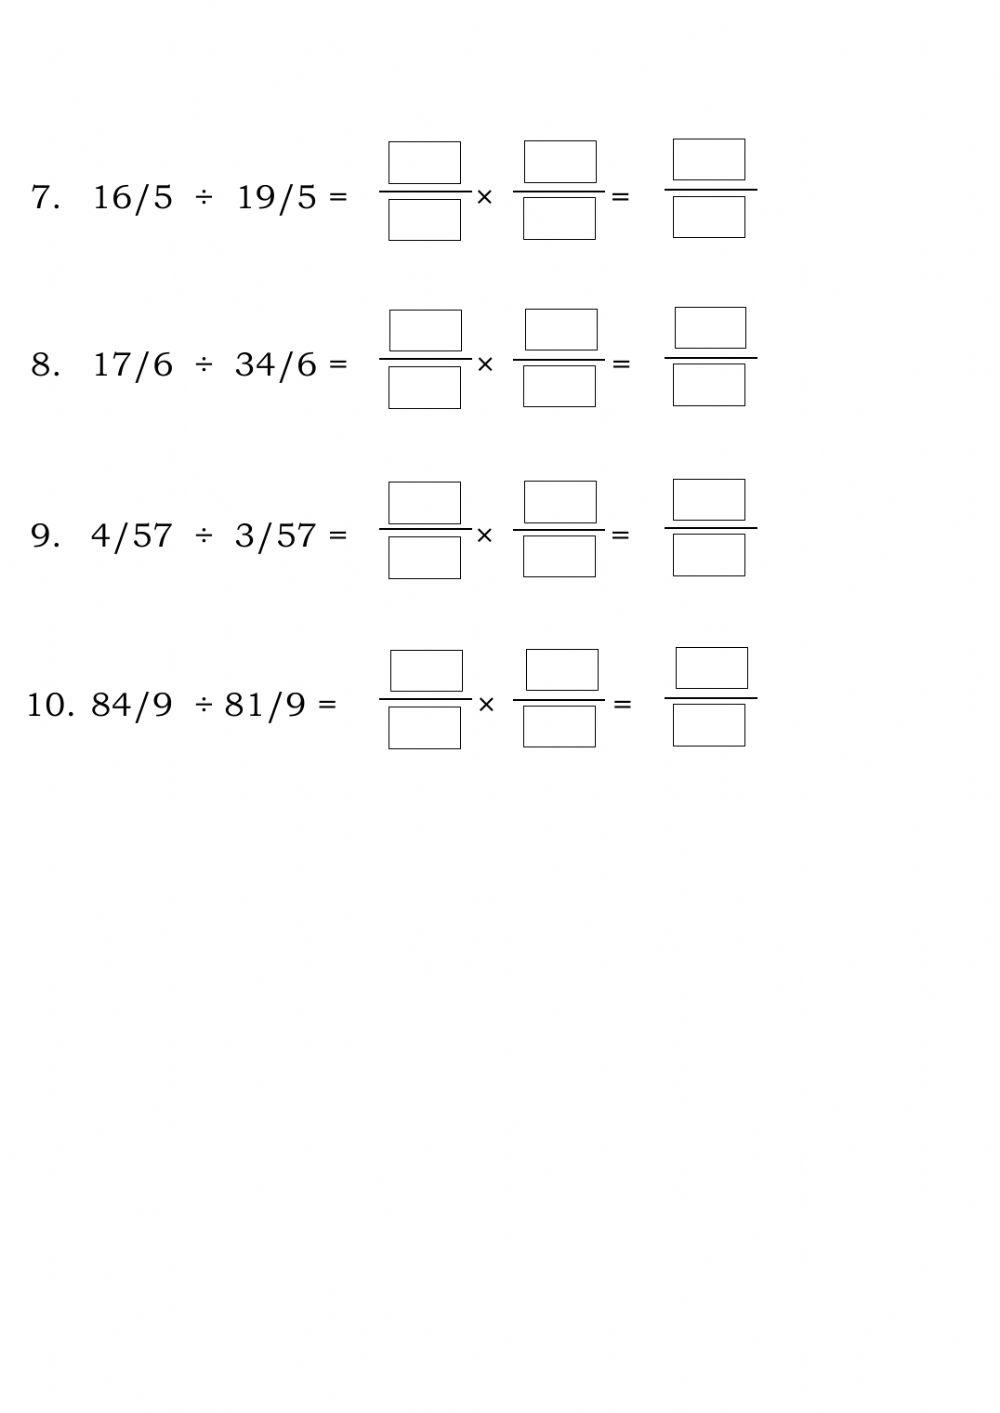 Division of like fractions